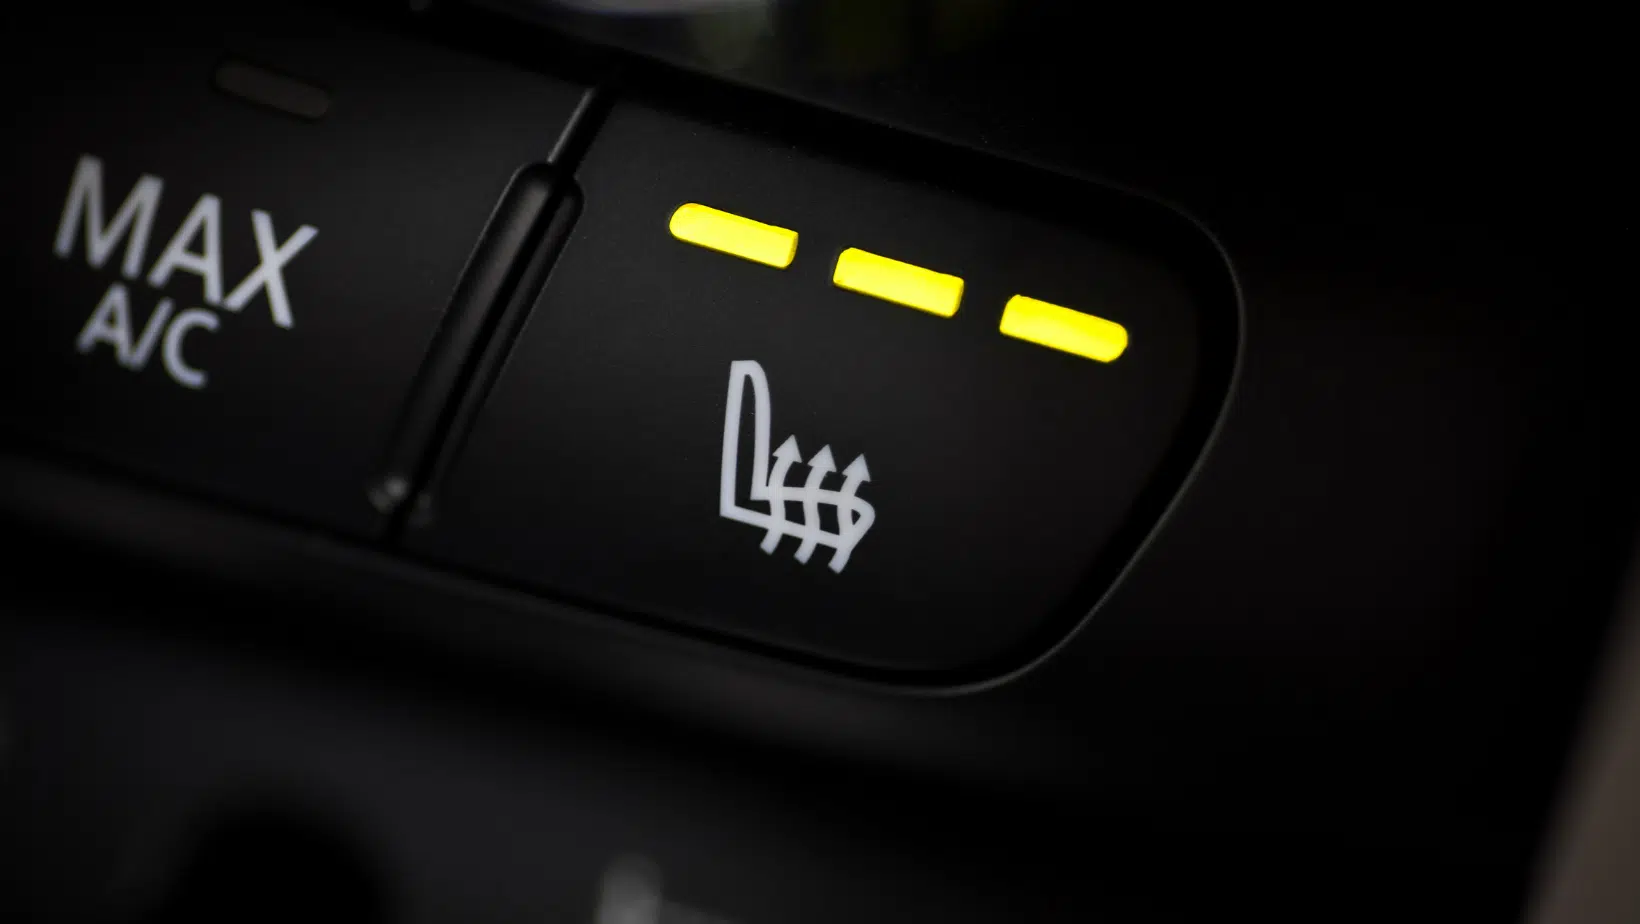 Heated Seats Sold At Canadian Tire Recalled!